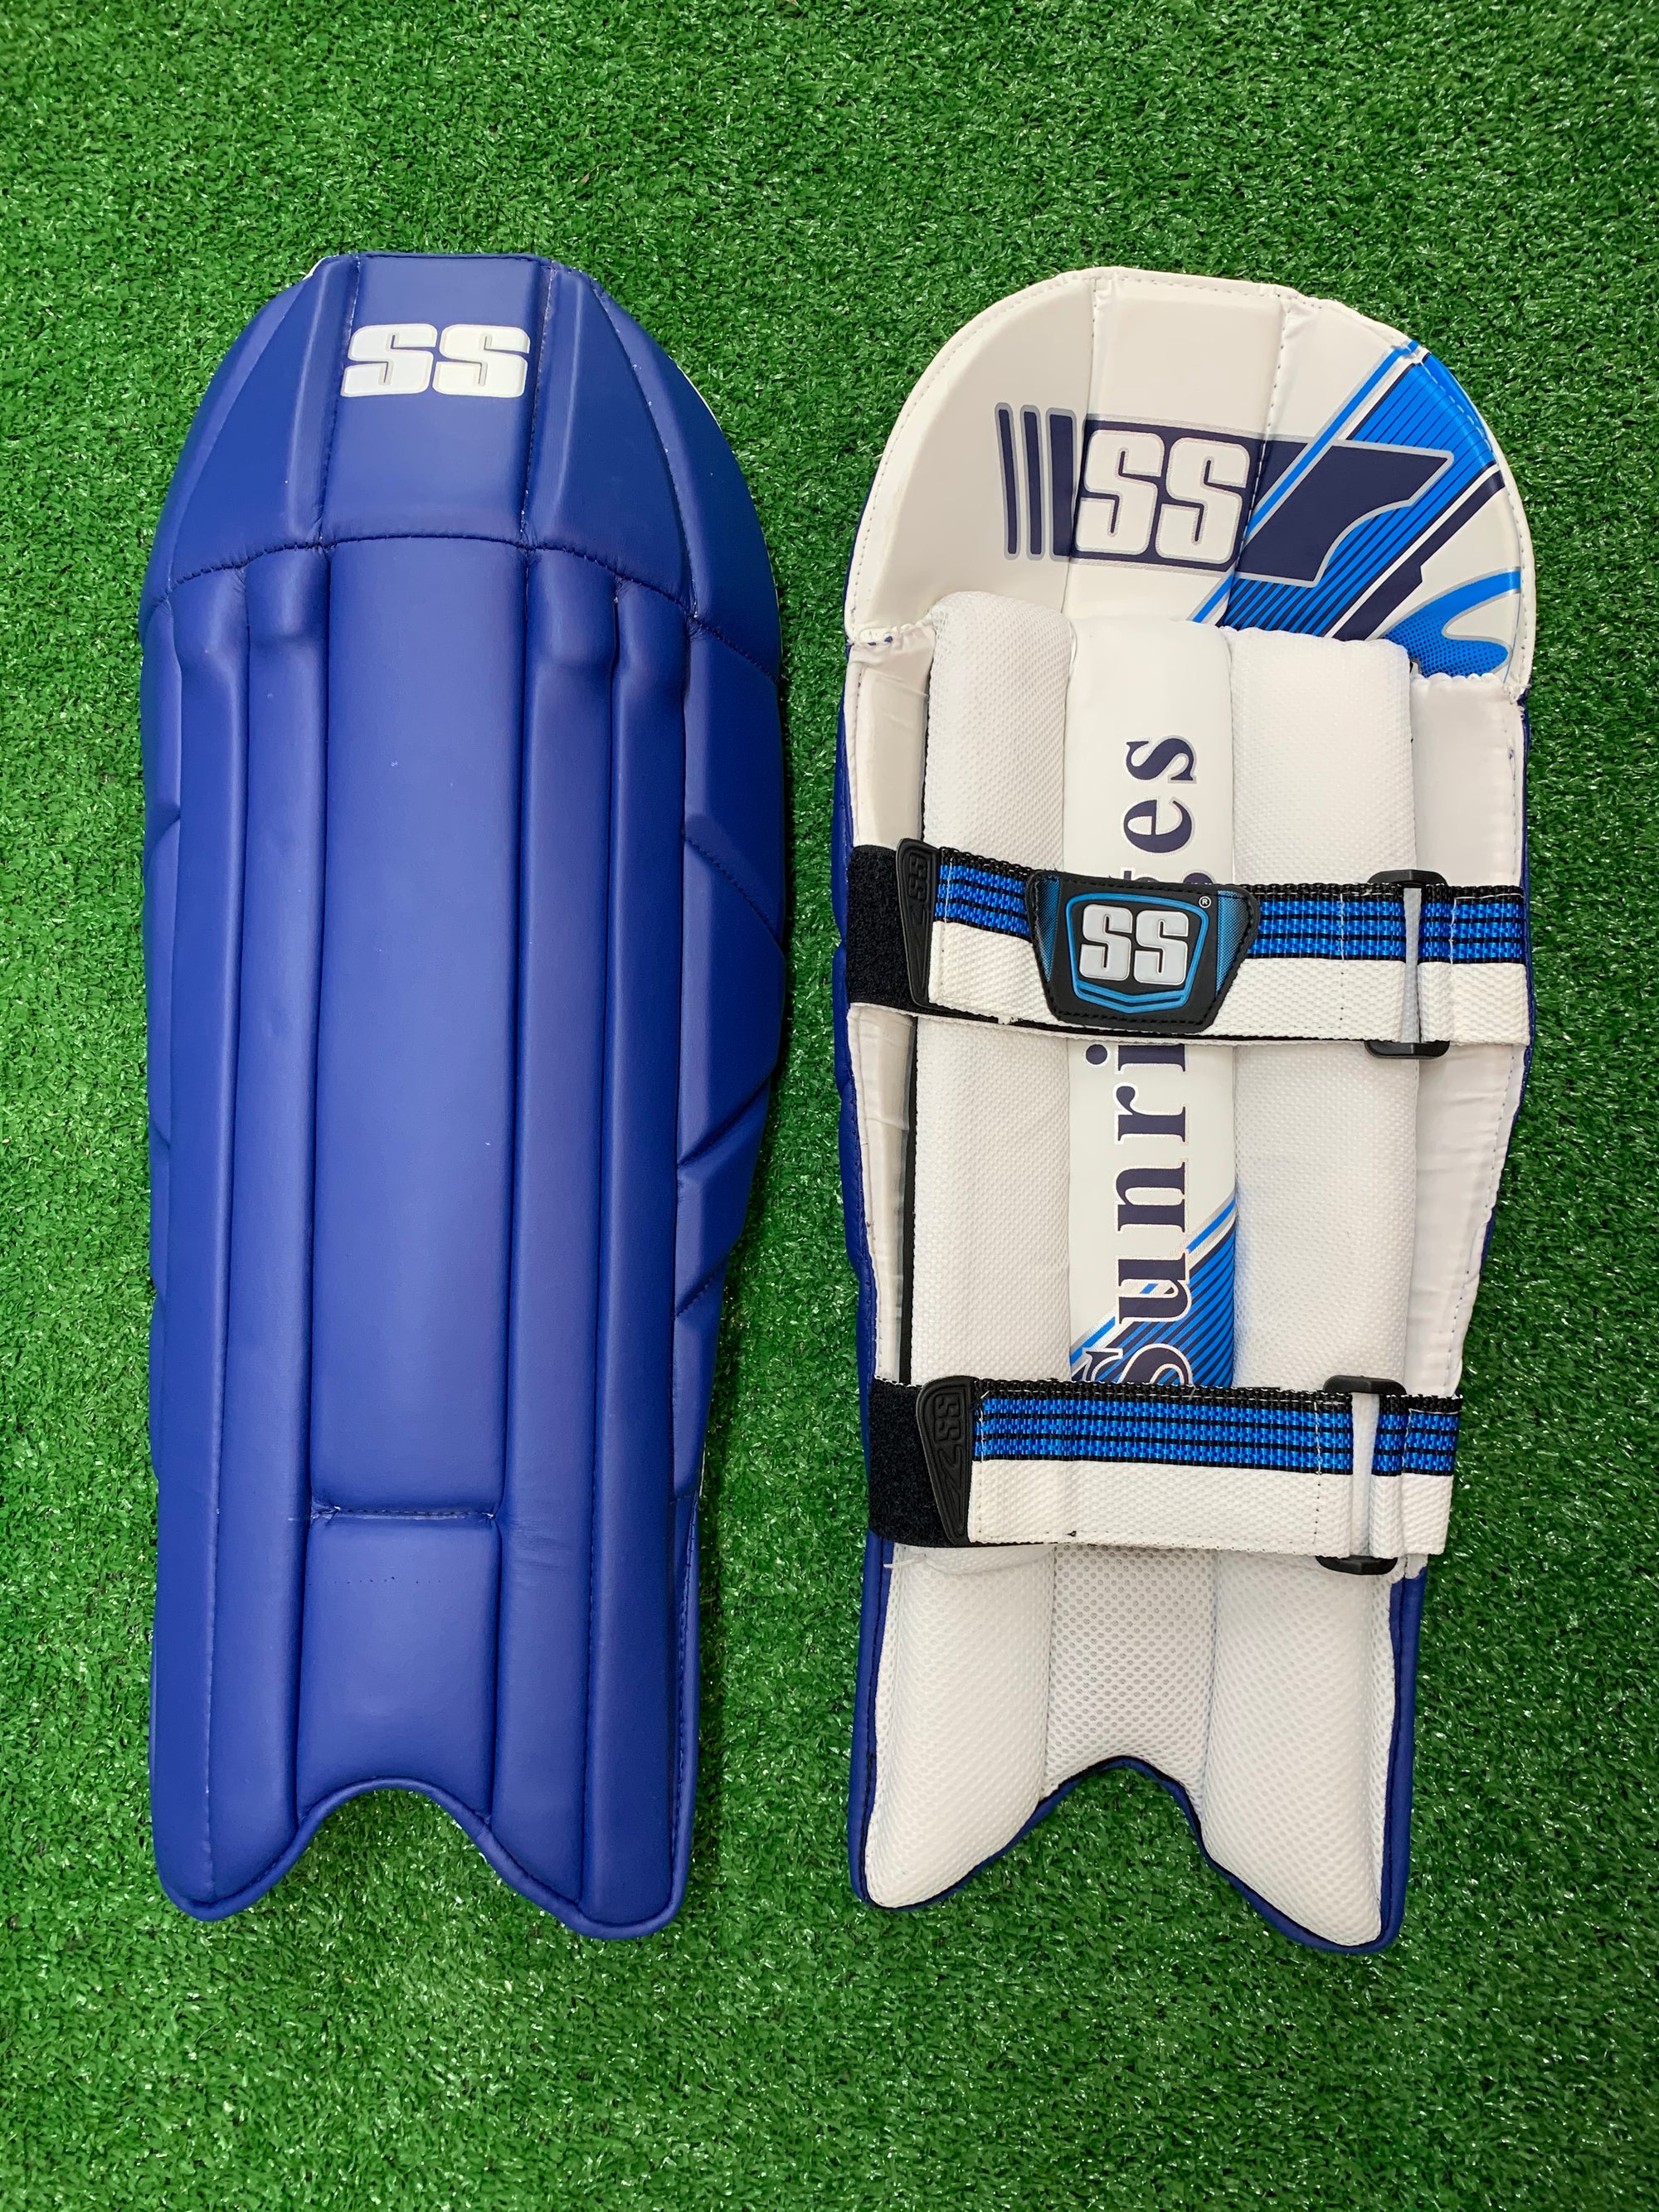 SS PROFESSIONAL ROYAL BLUE WICKET KEEPING PAD